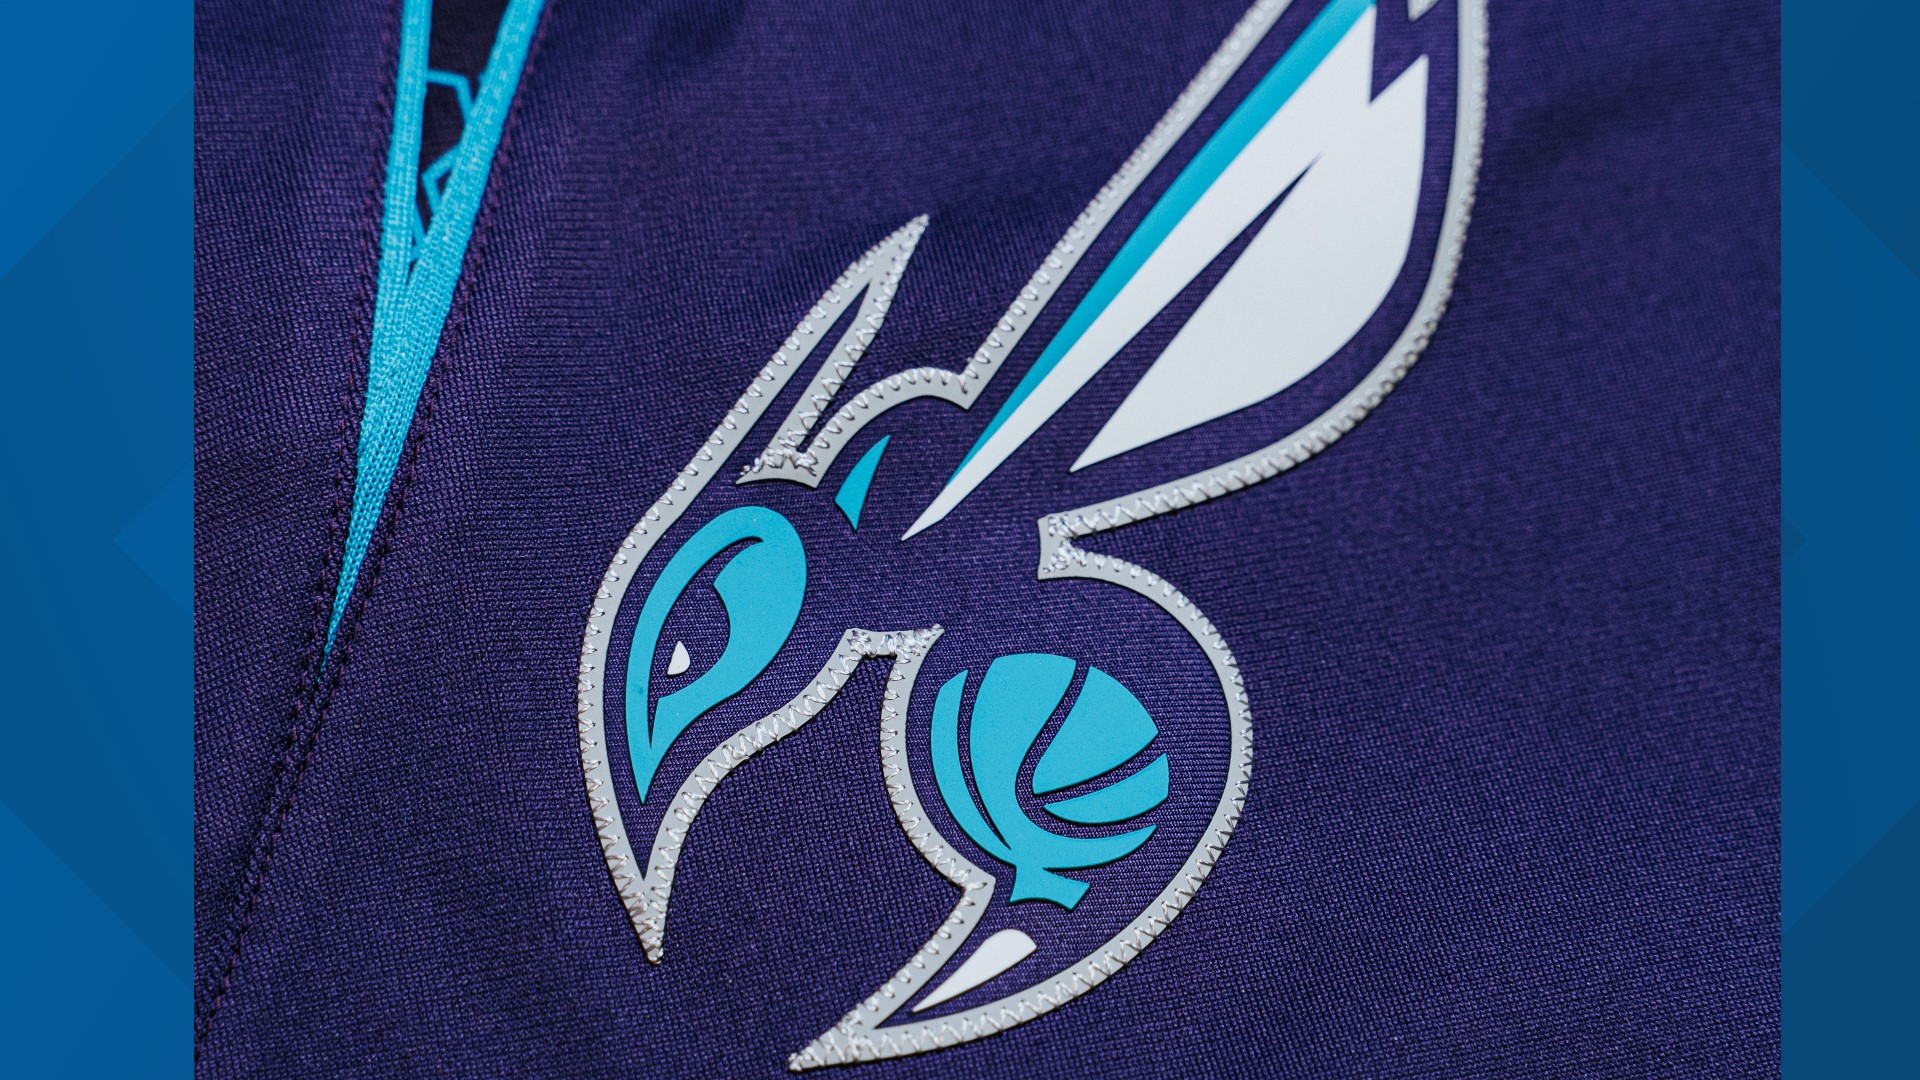 hornets city edition jersey 2023